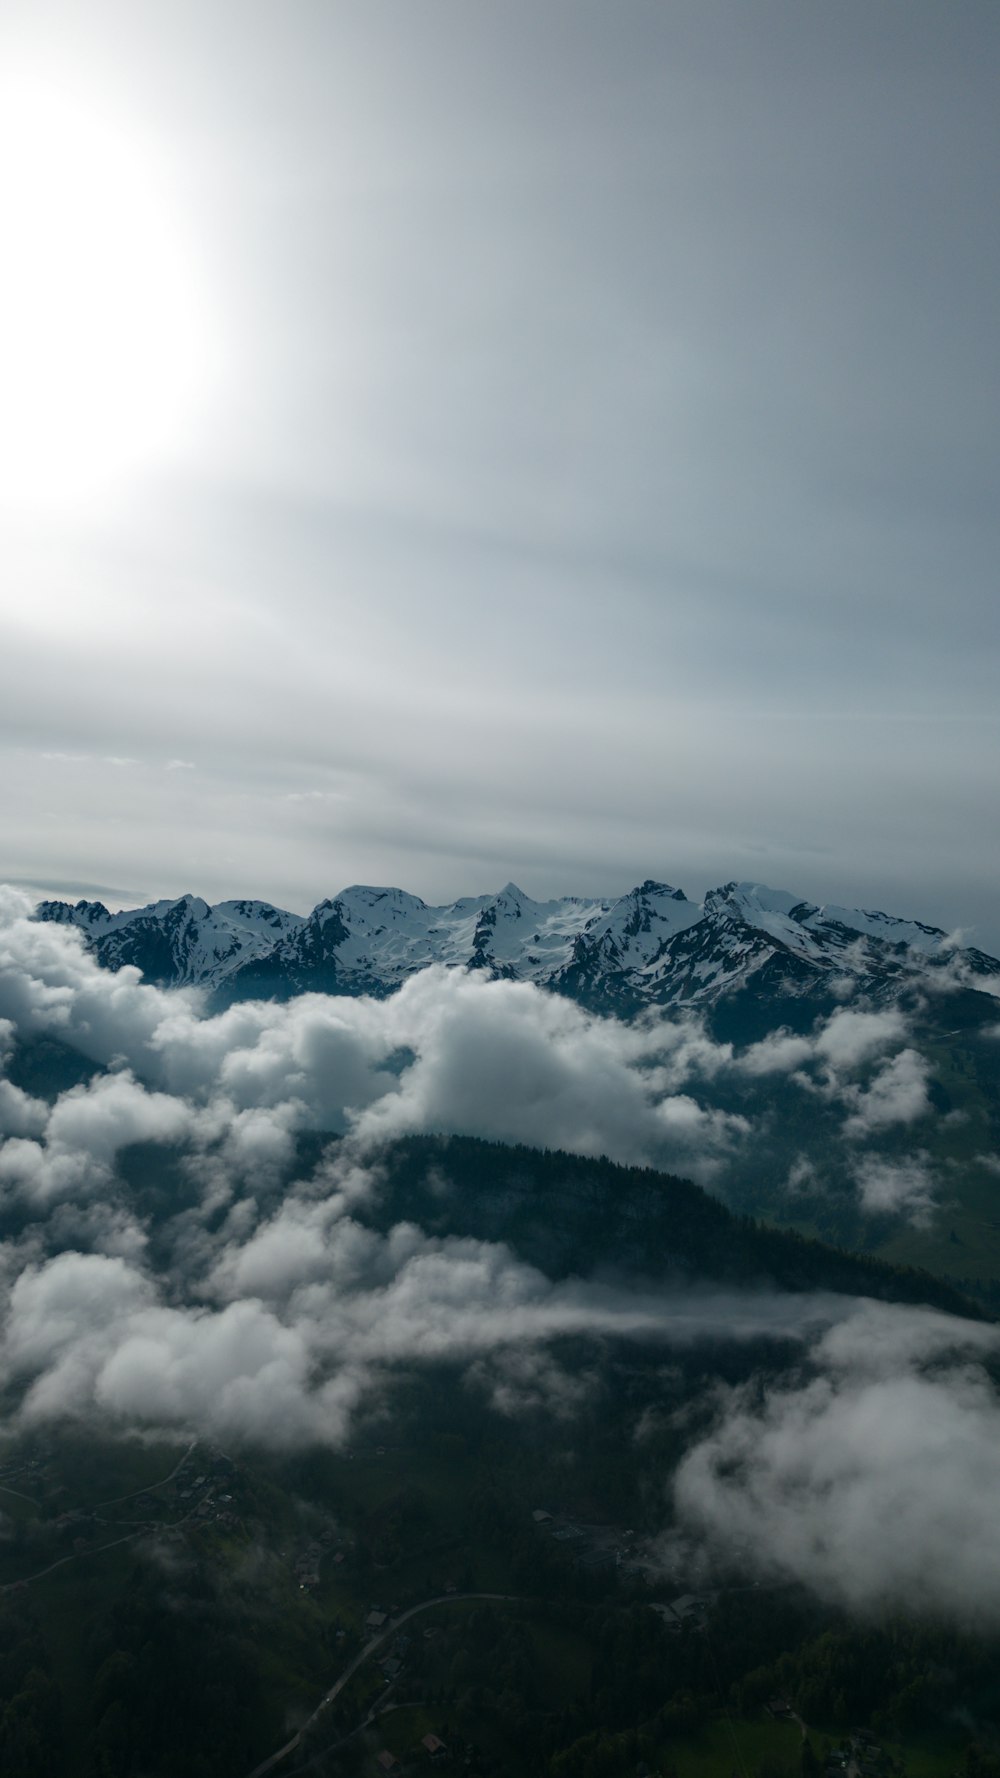 a view of the mountains and clouds from an airplane